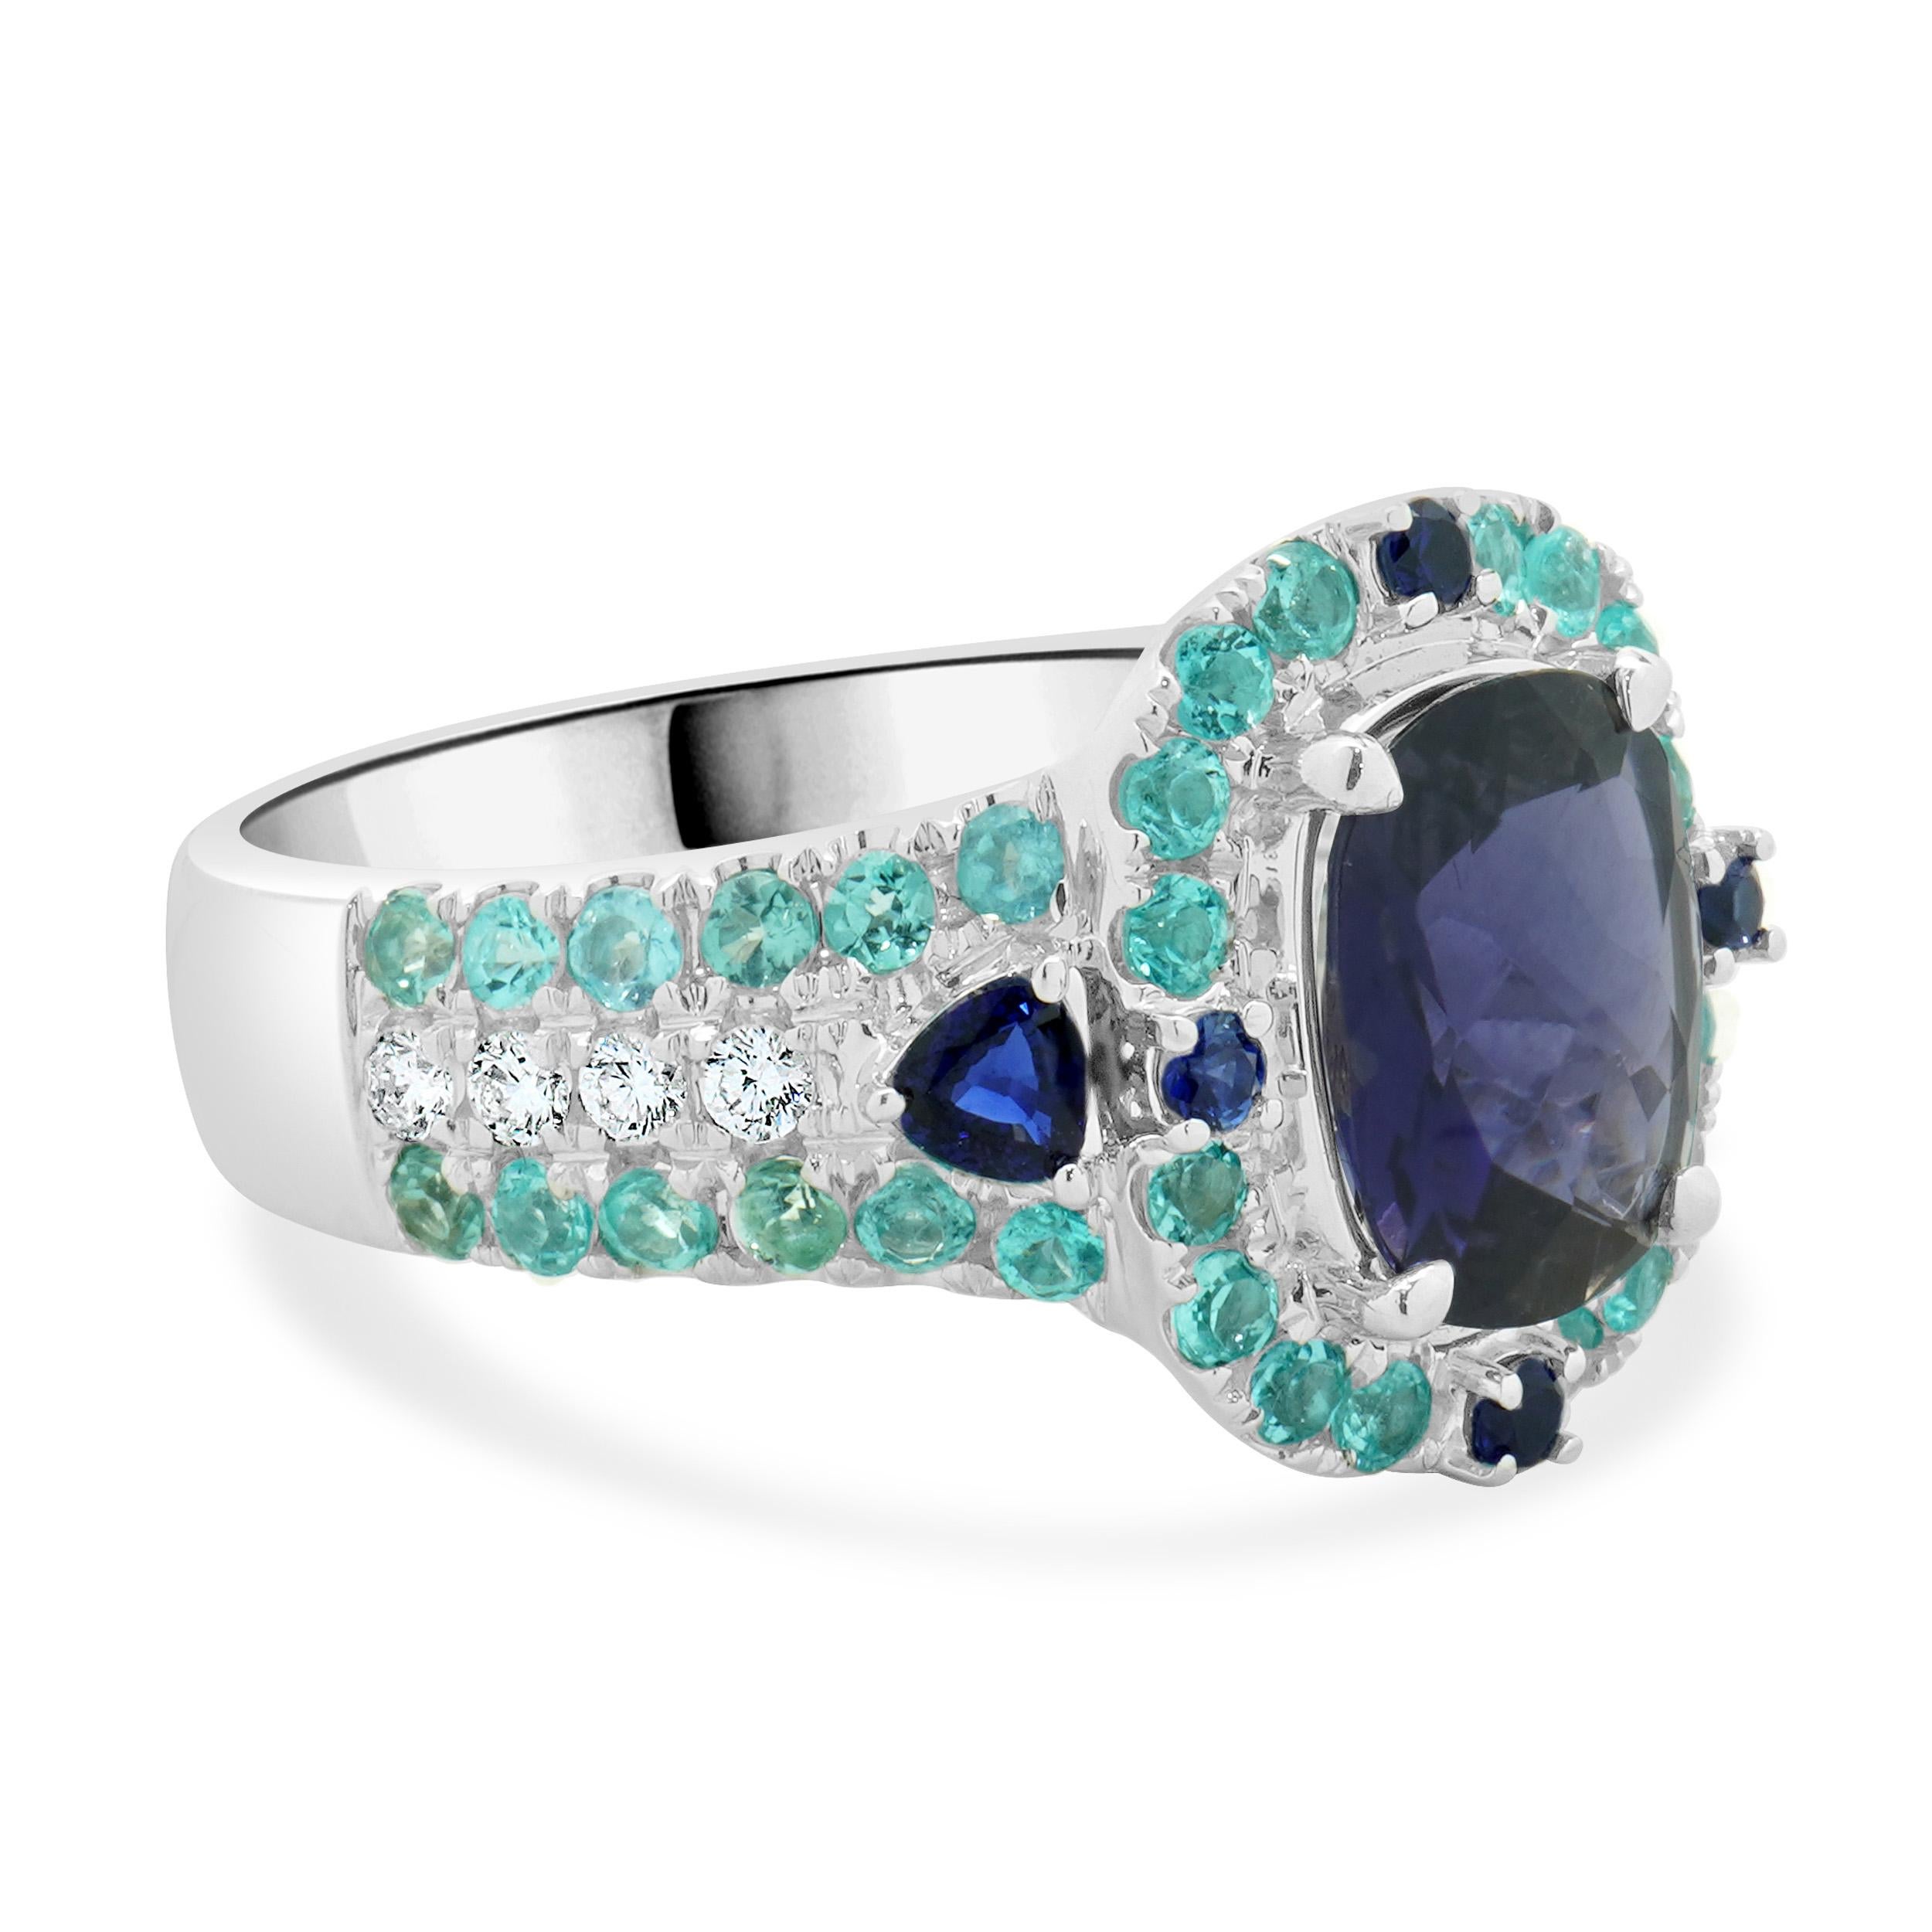 18 Karat White Gold Iolite and Paraiba Tourmaline Ring In Excellent Condition For Sale In Scottsdale, AZ